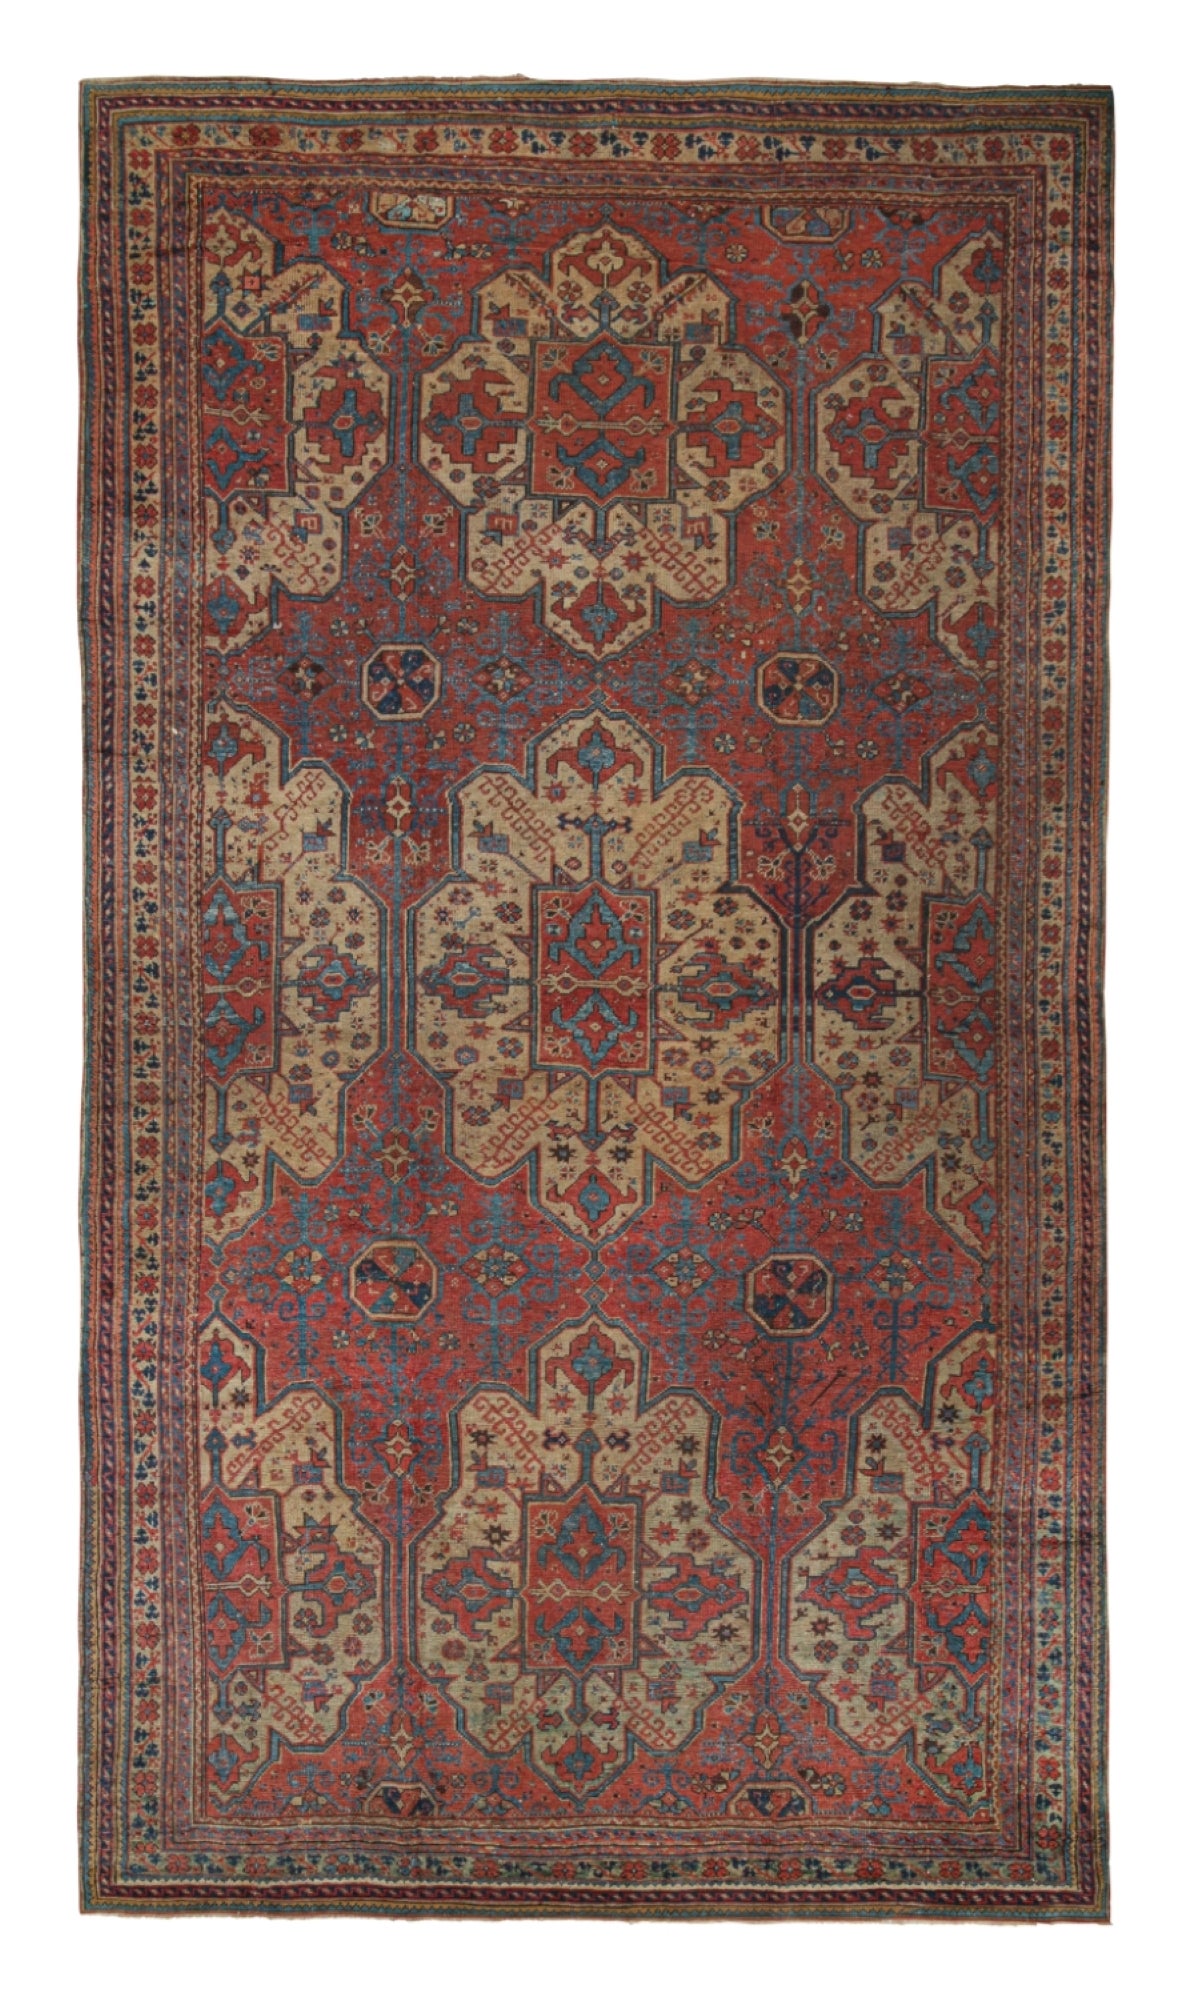 Antique Oversized Oushak Rug in Red with Geometric Patterns For Sale